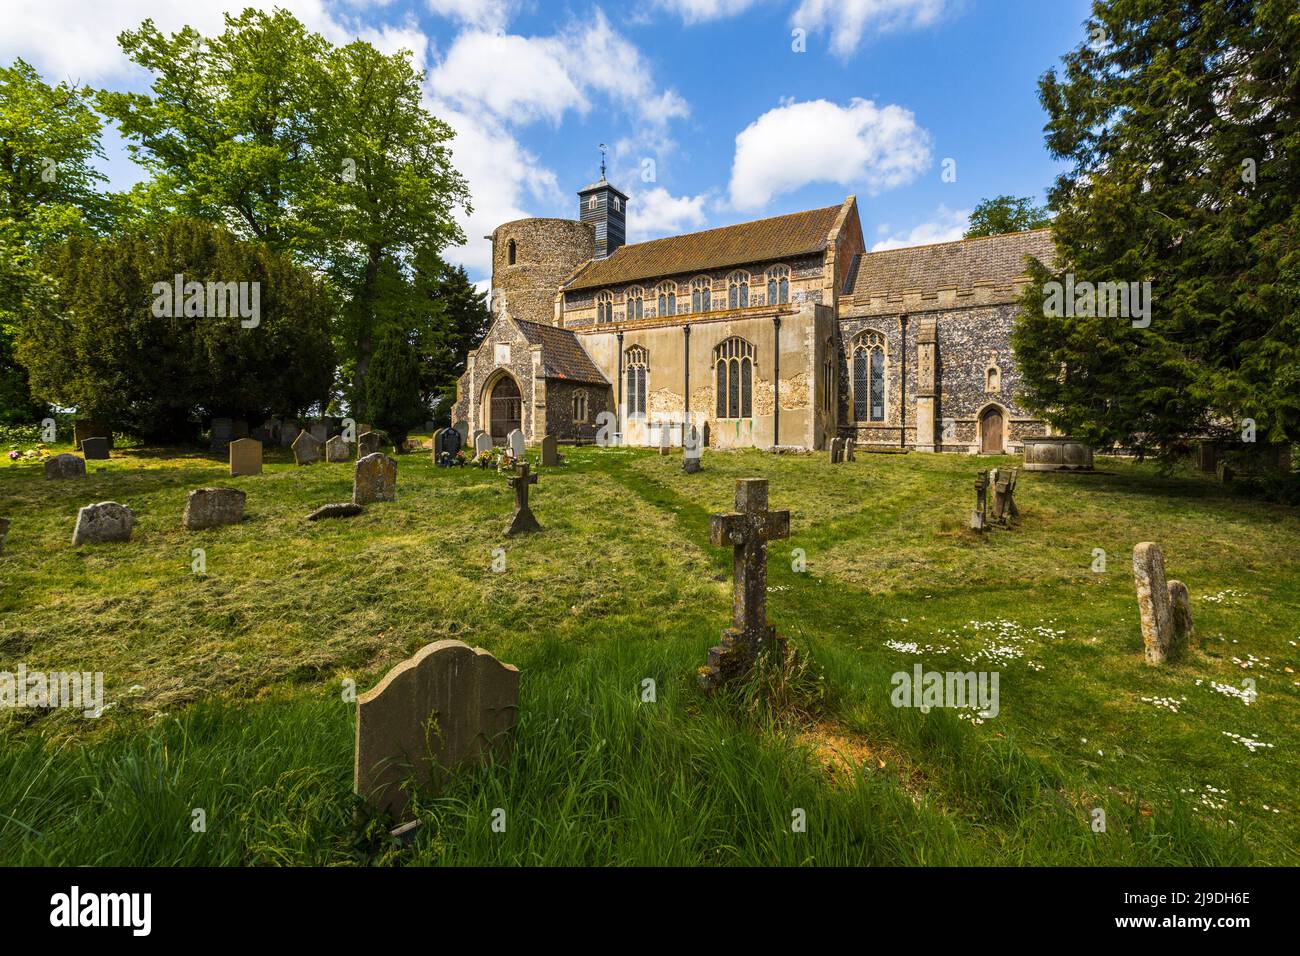 The Church of St Mary the Virgin is the church with the biggest round tower in England. Wortham, Suffolk, East Anglia, UK. Stock Photo